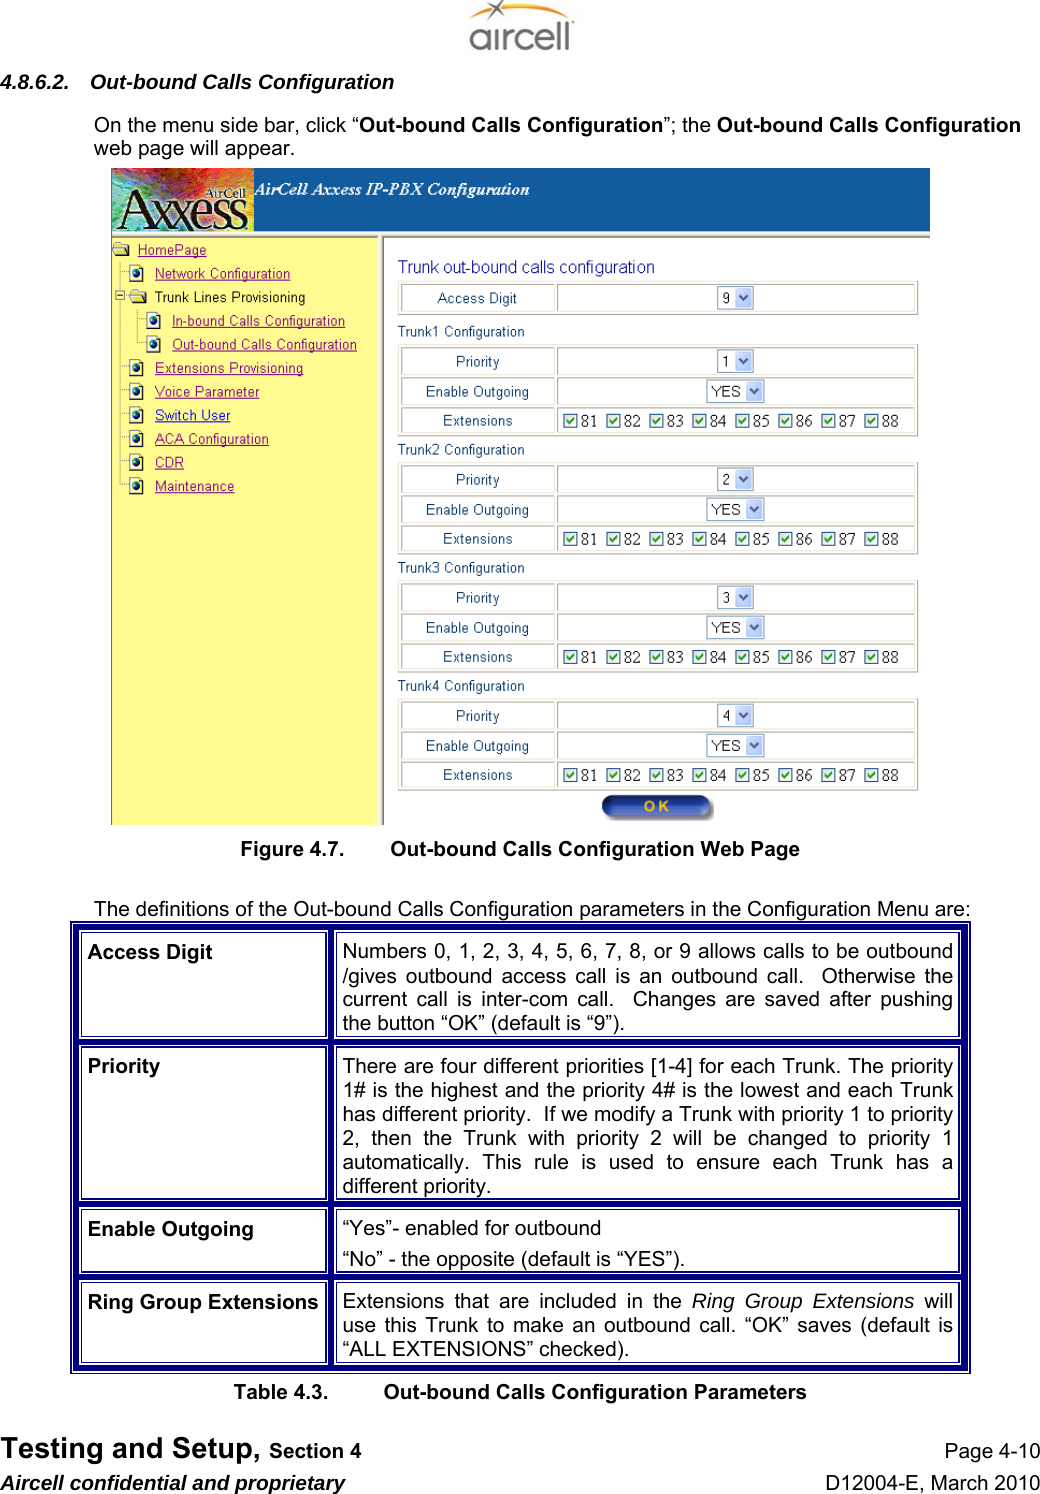  Testing and Setup, Section 4 Page 4-10 Aircell confidential and proprietary D12004-E, March 2010 4.8.6.2.  Out-bound Calls Configuration On the menu side bar, click “Out-bound Calls Configuration”; the Out-bound Calls Configuration web page will appear.                    Figure 4.7.  Out-bound Calls Configuration Web Page  The definitions of the Out-bound Calls Configuration parameters in the Configuration Menu are: Access Digit  Numbers 0, 1, 2, 3, 4, 5, 6, 7, 8, or 9 allows calls to be outbound /gives outbound access call is an outbound call.  Otherwise the current call is inter-com call.  Changes are saved after pushing the button “OK” (default is “9”). Priority  There are four different priorities [1-4] for each Trunk. The priority 1# is the highest and the priority 4# is the lowest and each Trunk has different priority.  If we modify a Trunk with priority 1 to priority 2, then the Trunk with priority 2 will be changed to priority 1automatically. This rule is used to ensure each Trunk has a different priority. Enable Outgoing  “Yes”- enabled for outbound  “No” - the opposite (default is “YES”). Ring Group Extensions  Extensions that are included in the Ring Group Extensions will use this Trunk to make an outbound call. “OK” saves (default is “ALL EXTENSIONS” checked). Table 4.3.  Out-bound Calls Configuration Parameters 